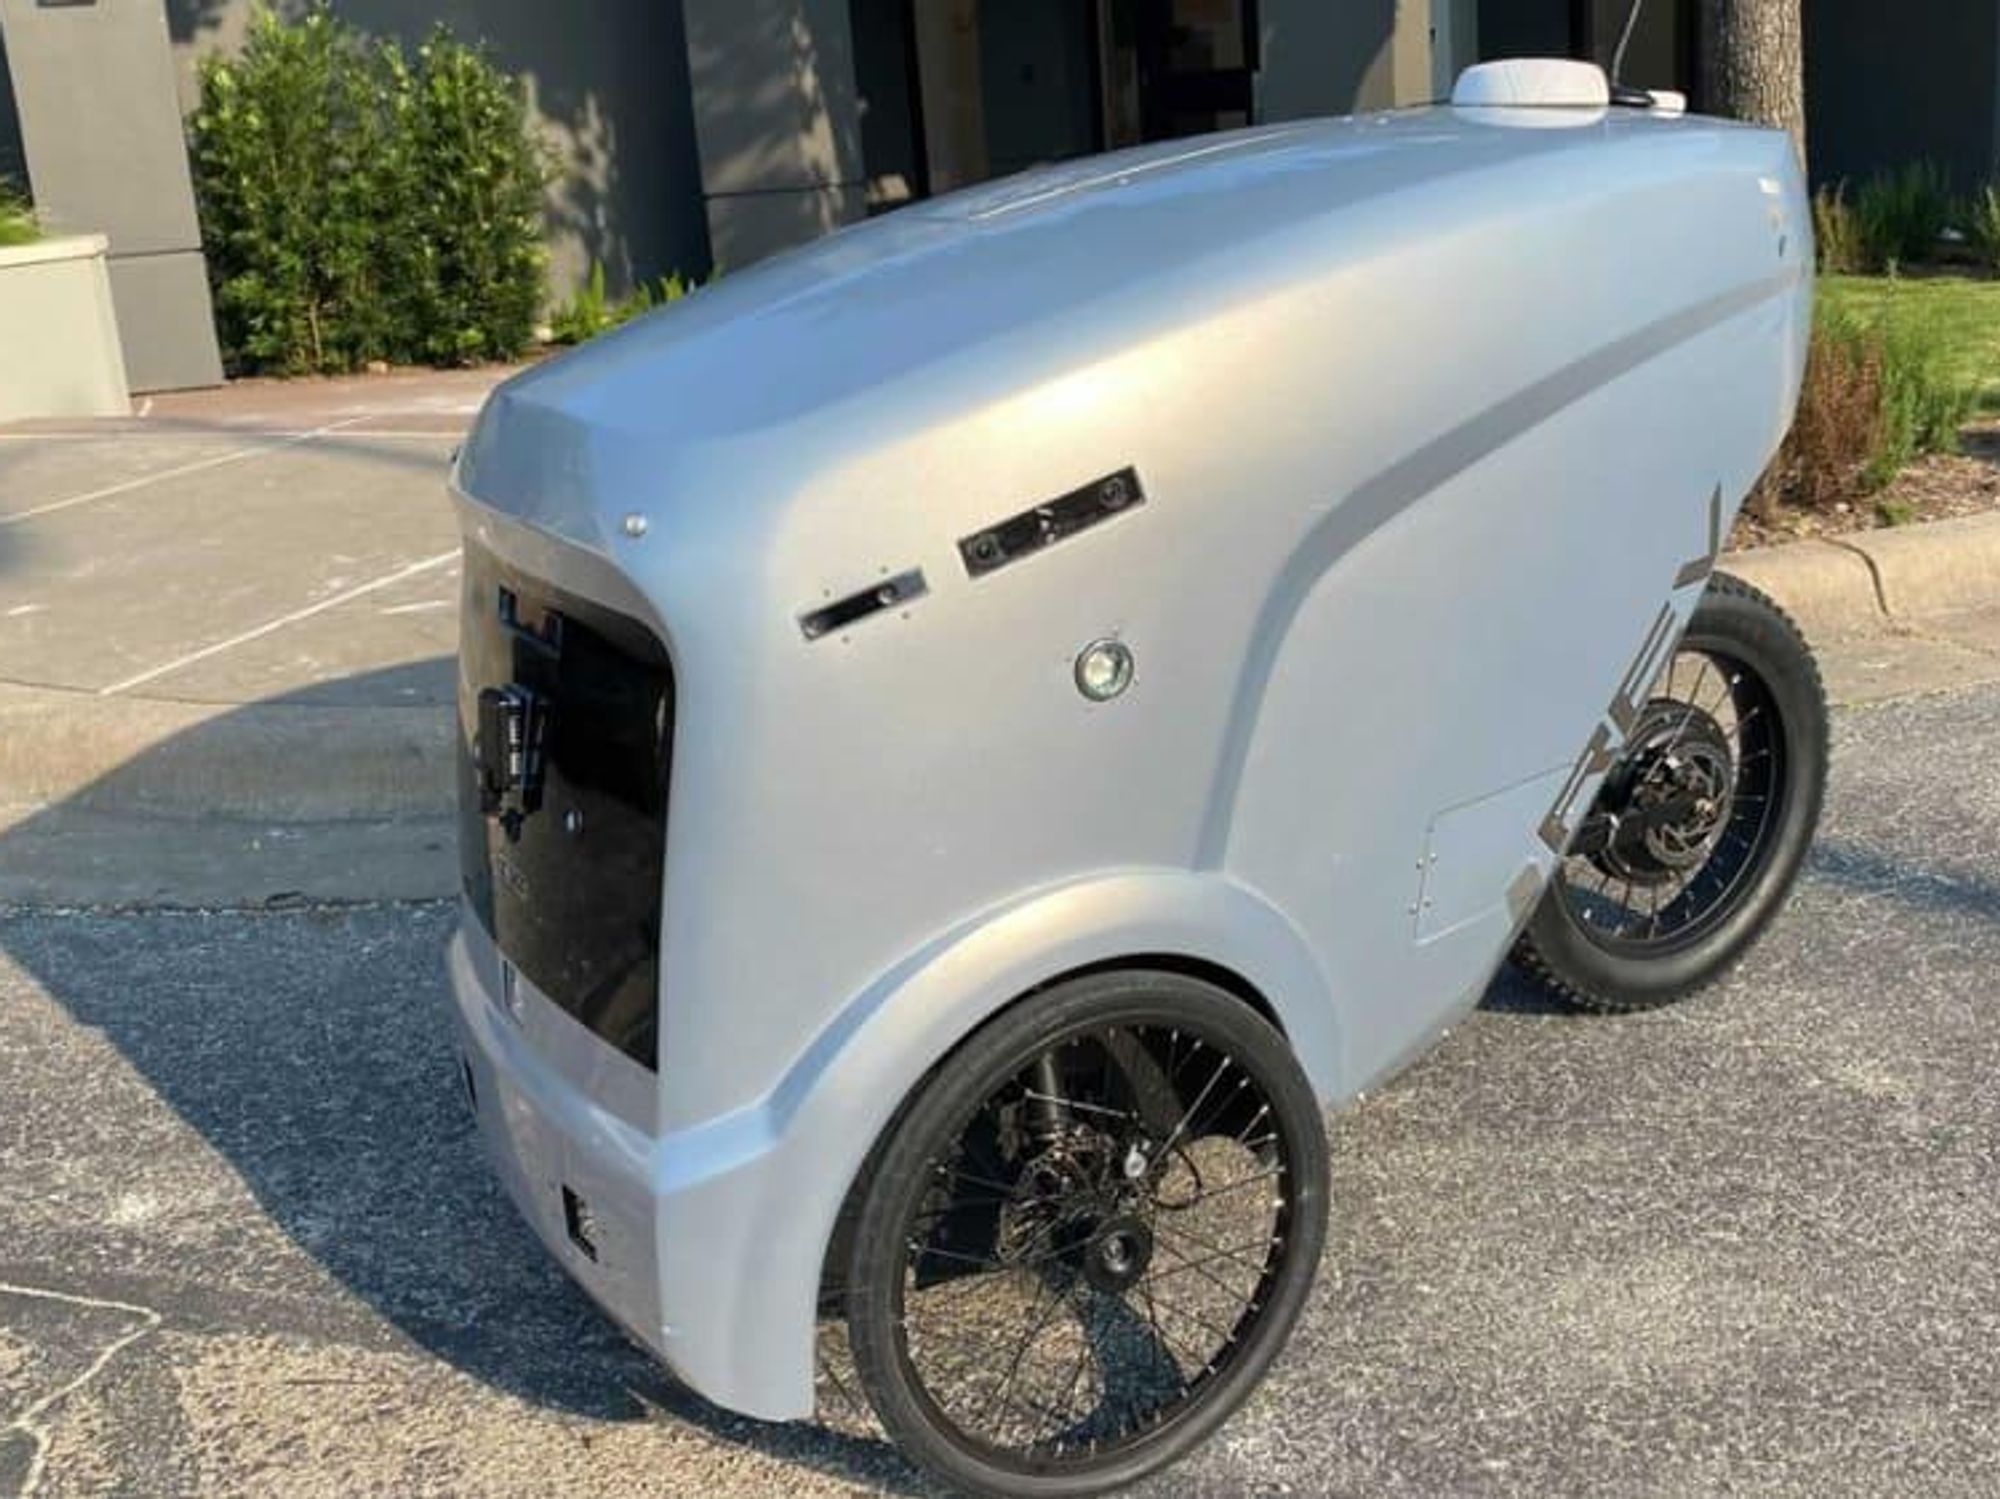 Robot food delivery device in Austin